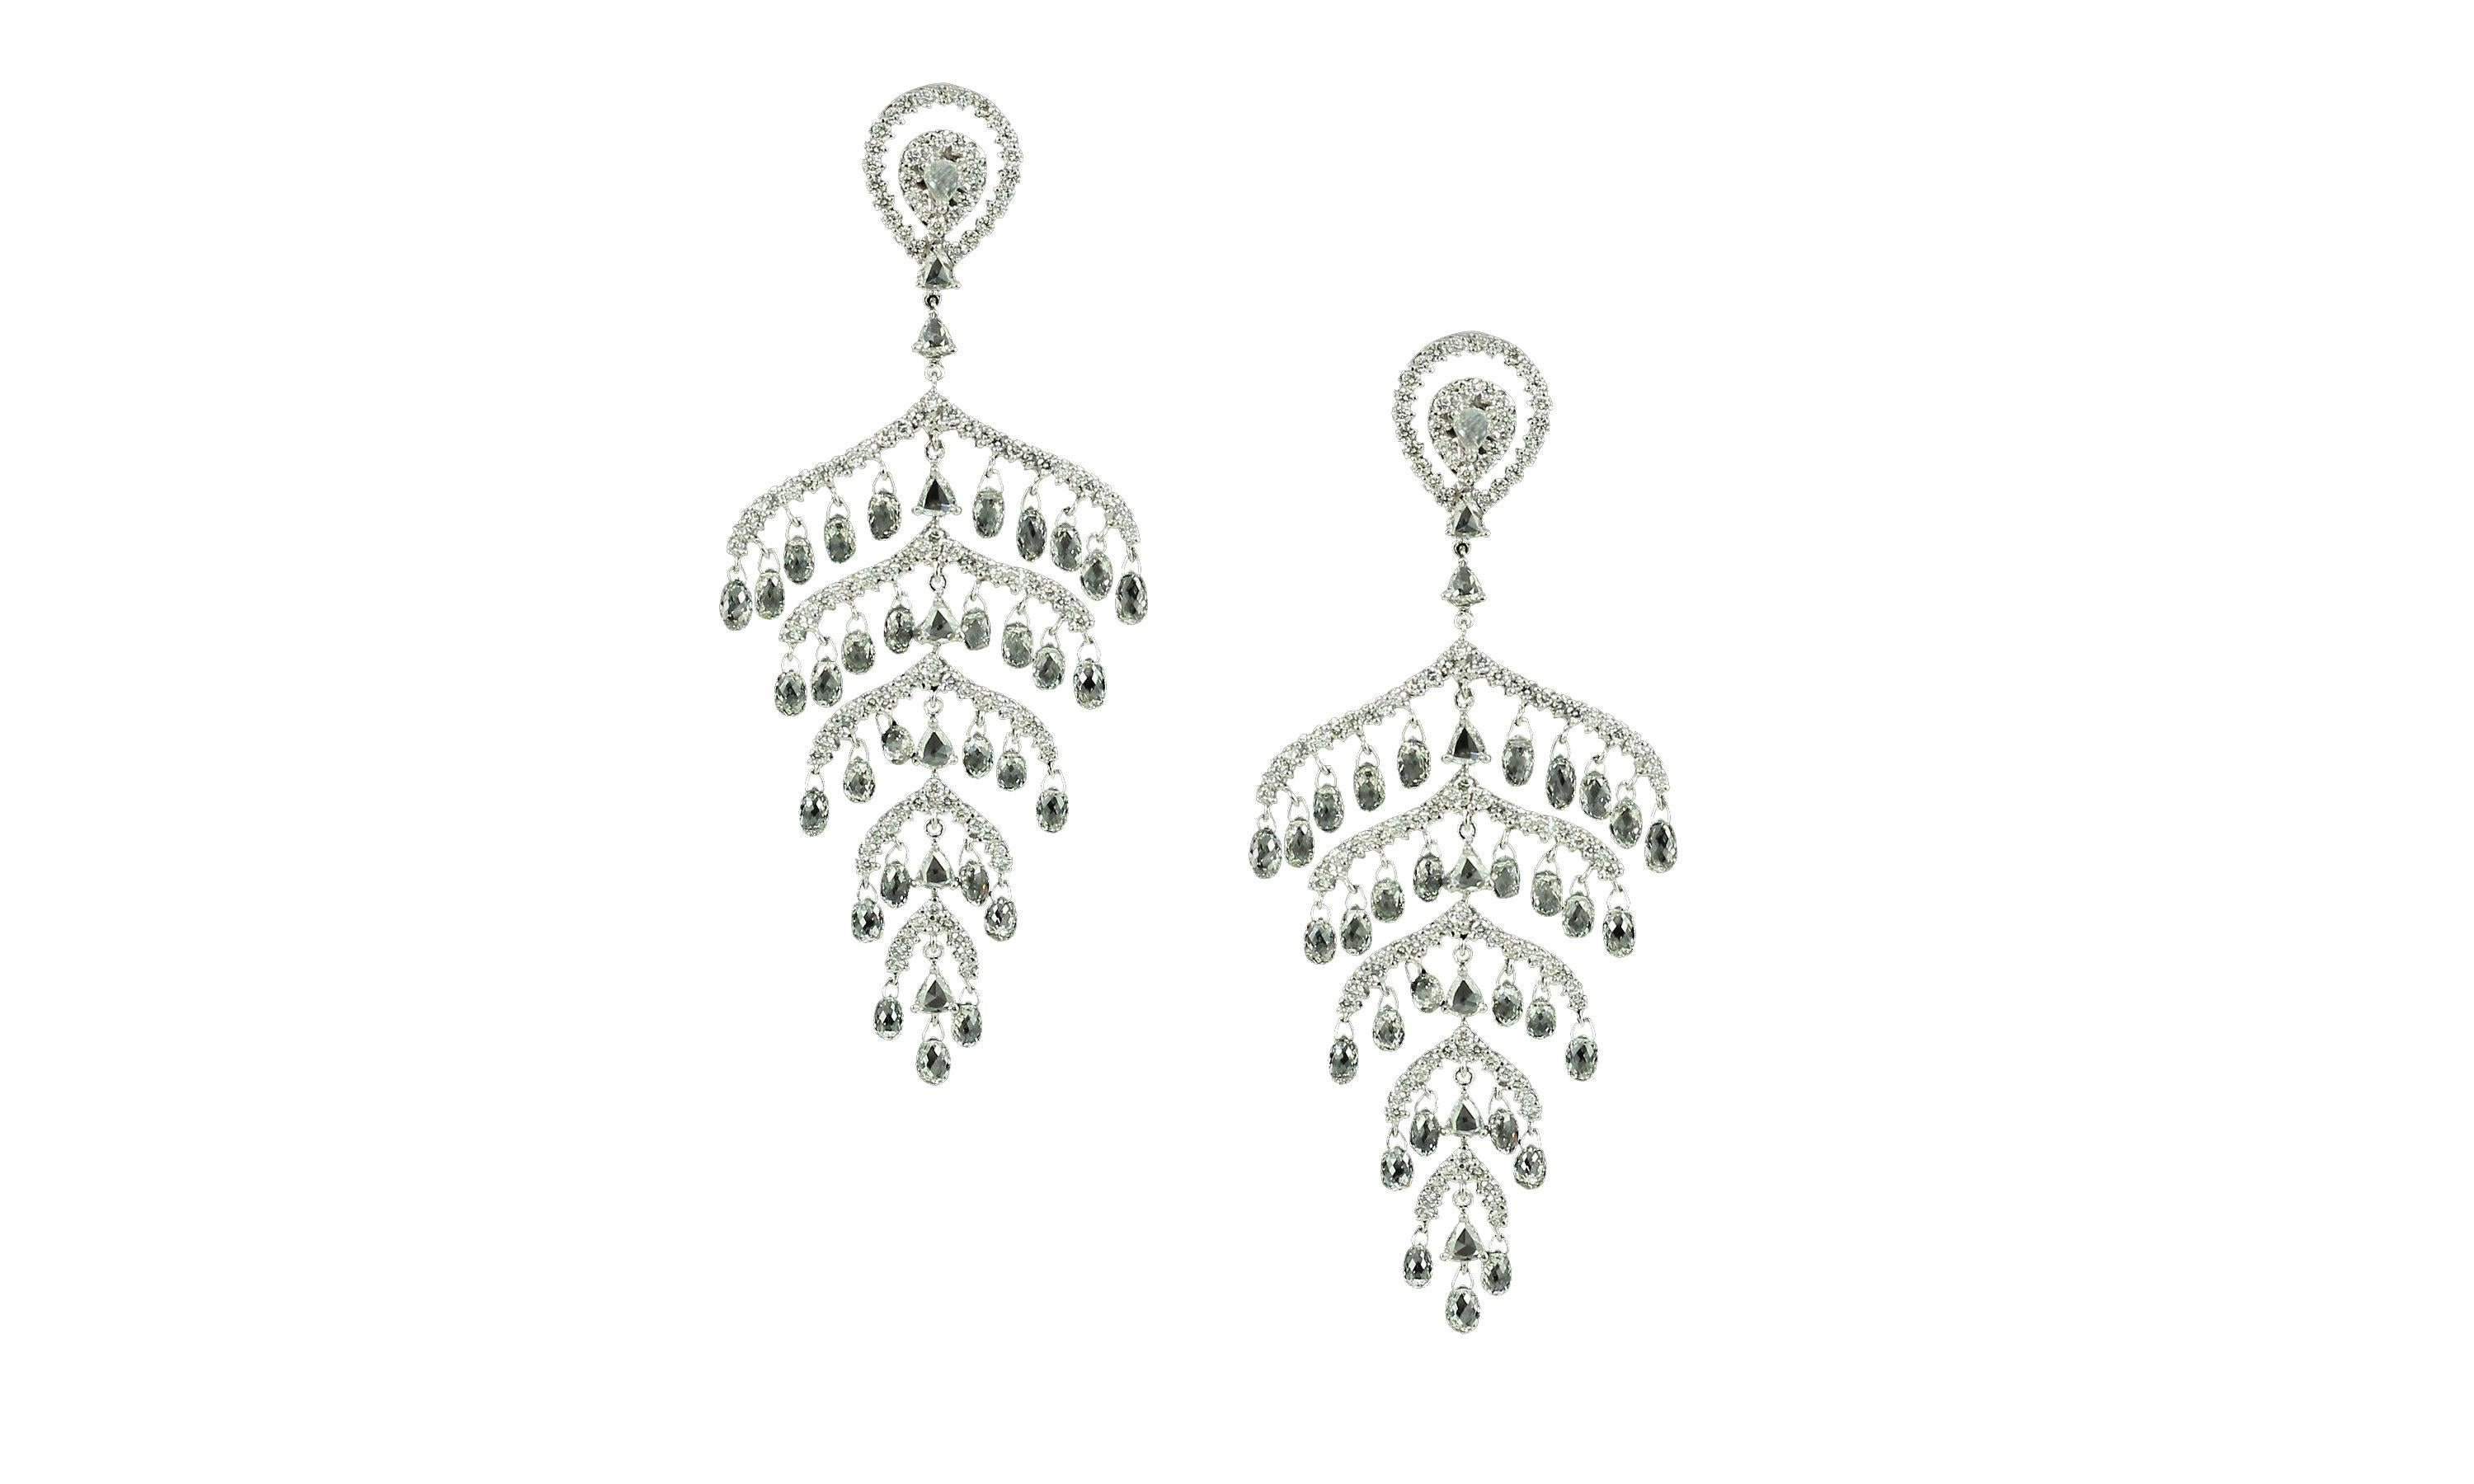 PANIM 14.84 Carat Diamond Briolette 18k White Gold Chandelier Earrings

The intricate design of the diamond briolette earrings is truly captivating. The way they hang like chandeliers adds a touch of elegance and sophistication to any outfit. The